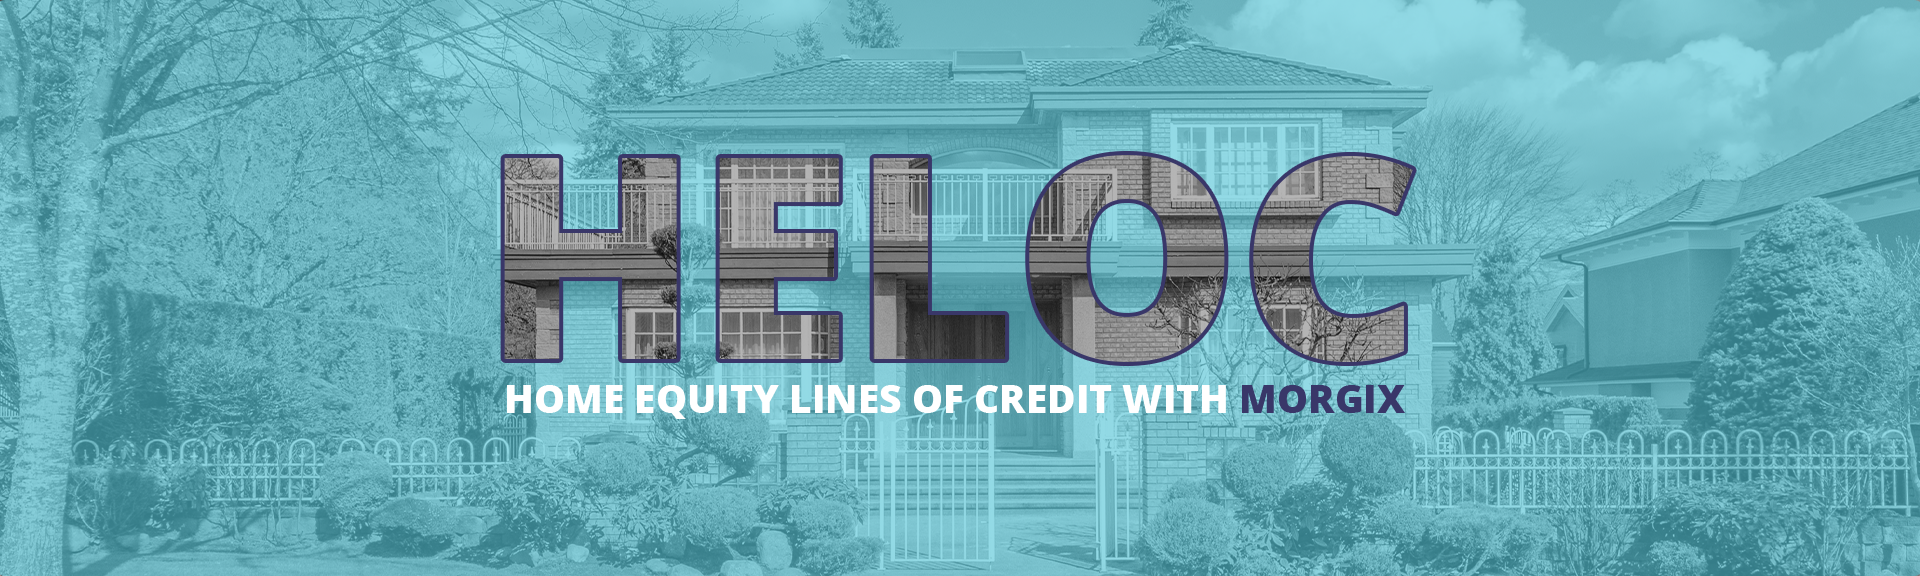 Home equity line of credit banner